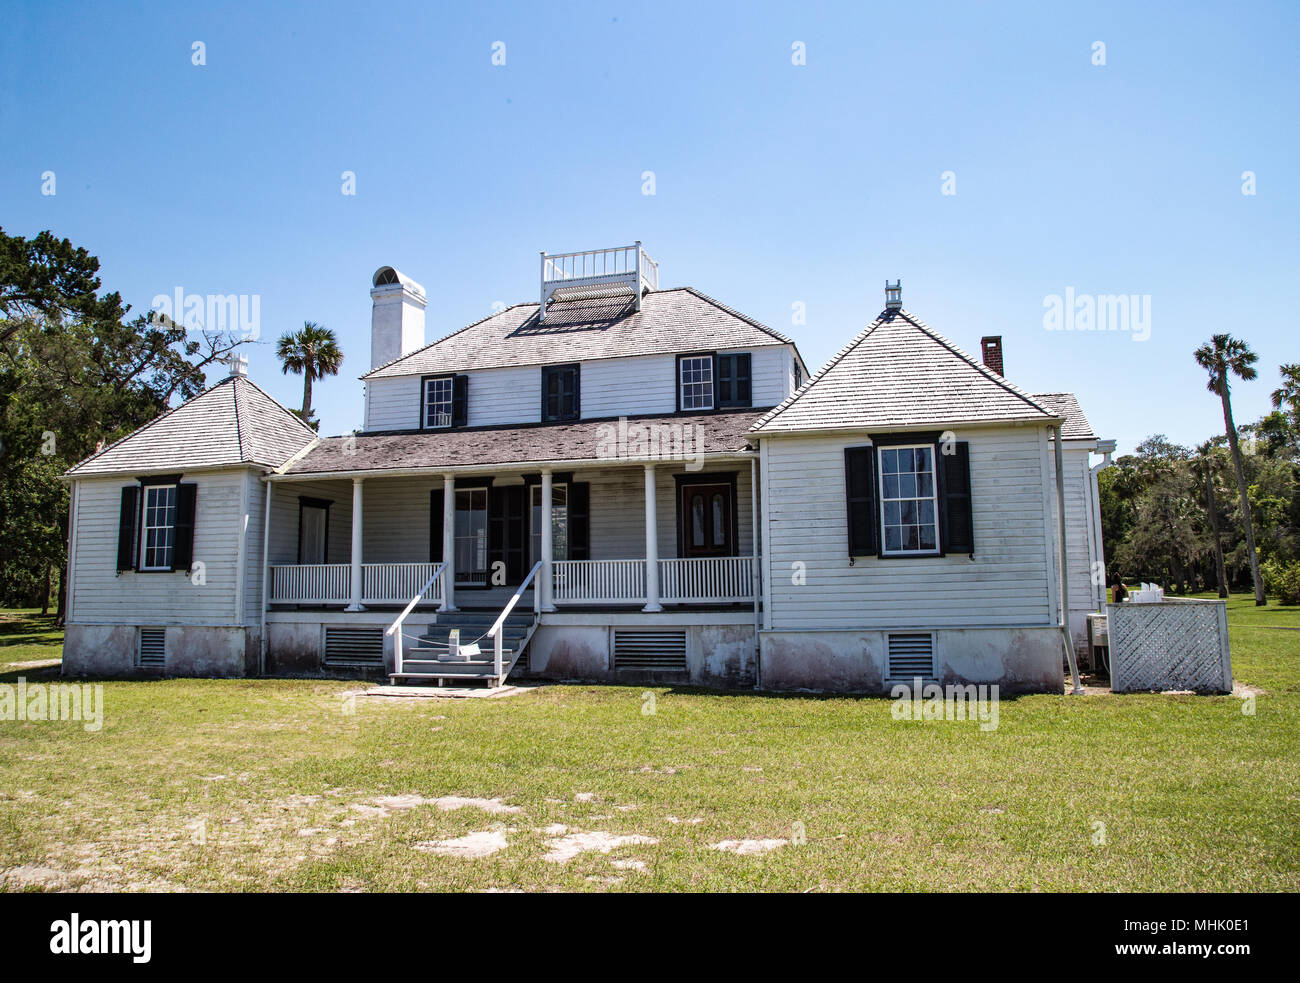 The Kingsley Plantation house in Jacksonville Florida sits on an island in the Fort George River. Stock Photo